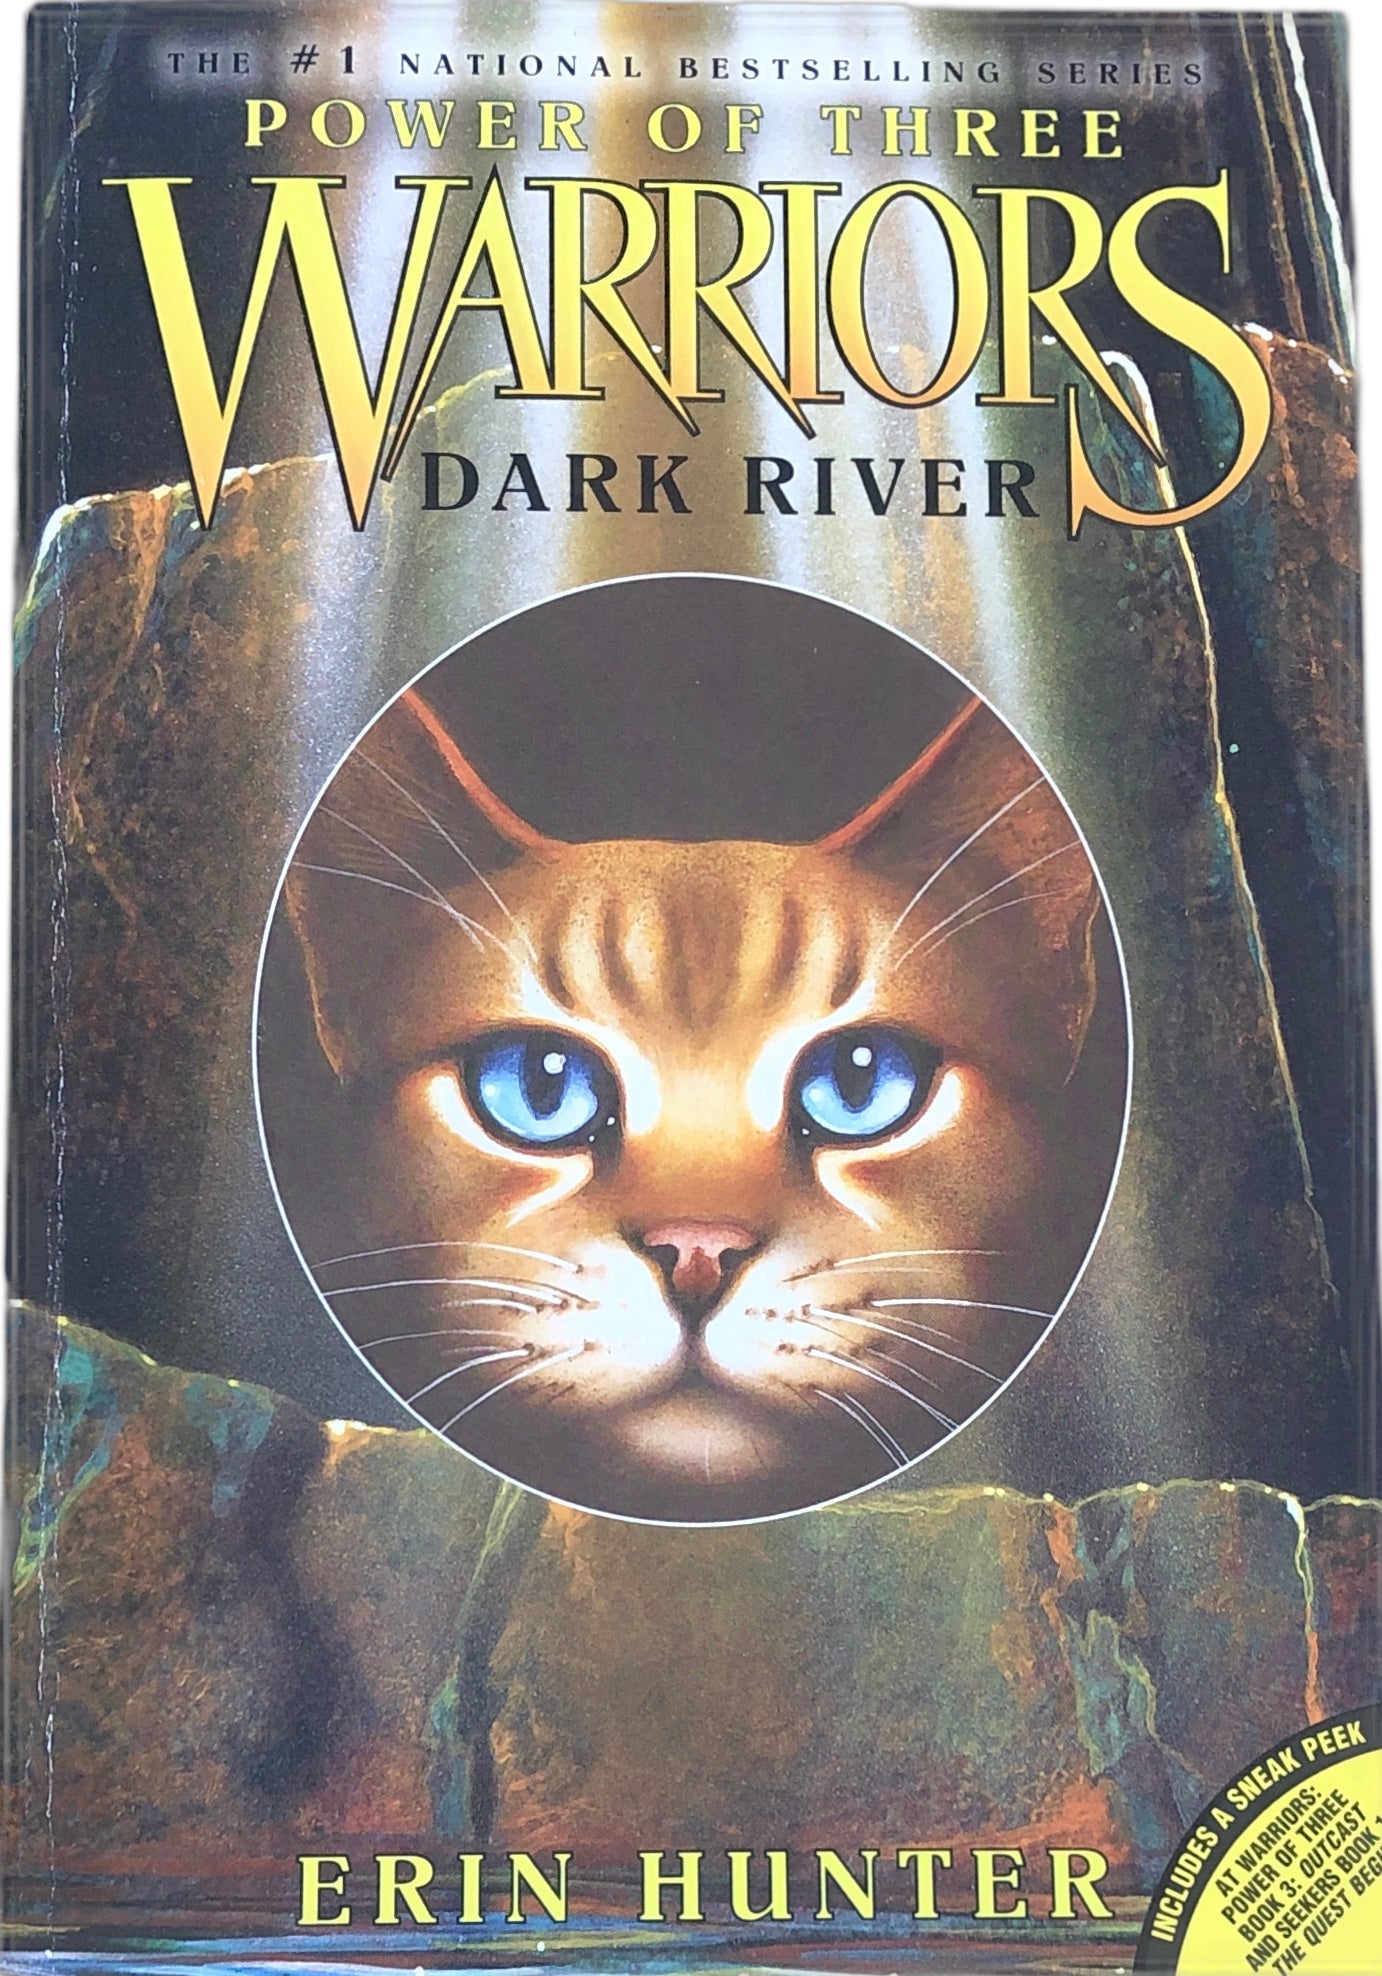 Warriors Power Of Three Outcast Book